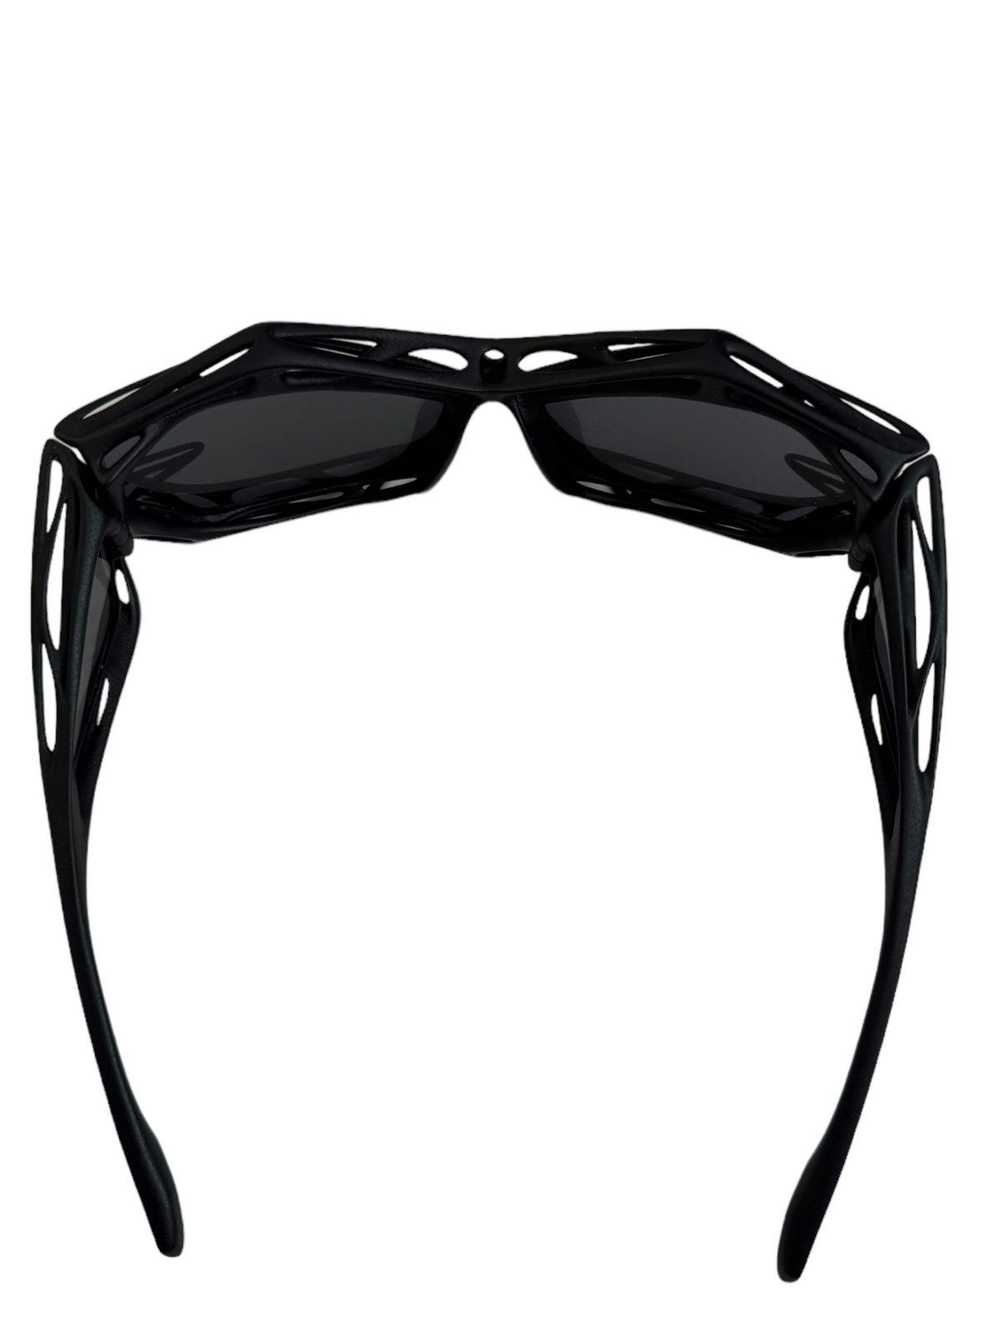 Givenchy 3D Print Cut Cage Sunglasses - image 6